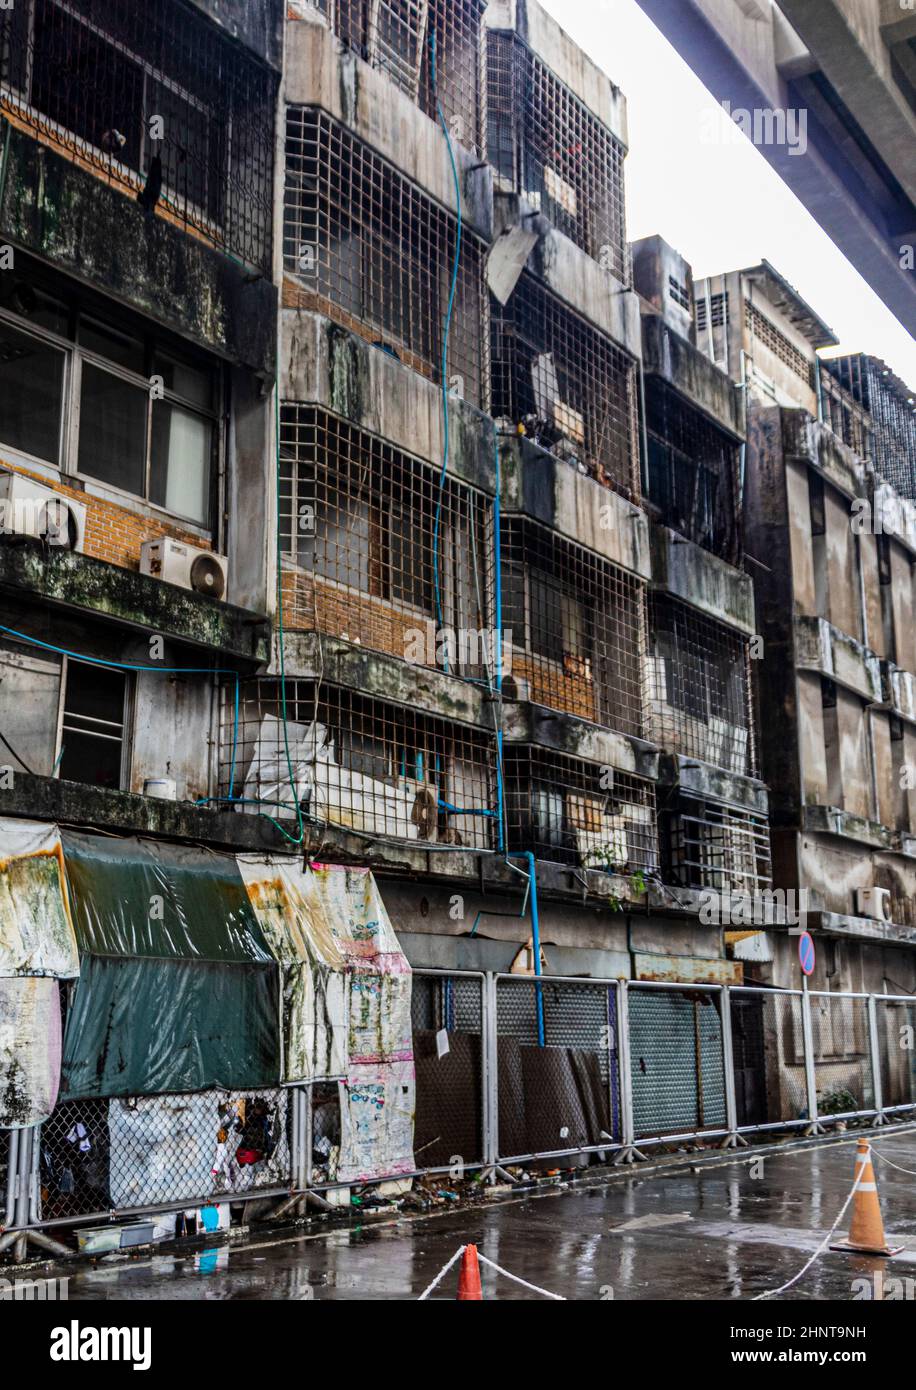 Unsightly run down poor dirty old areas in Bangkok Thailand. Stock Photo